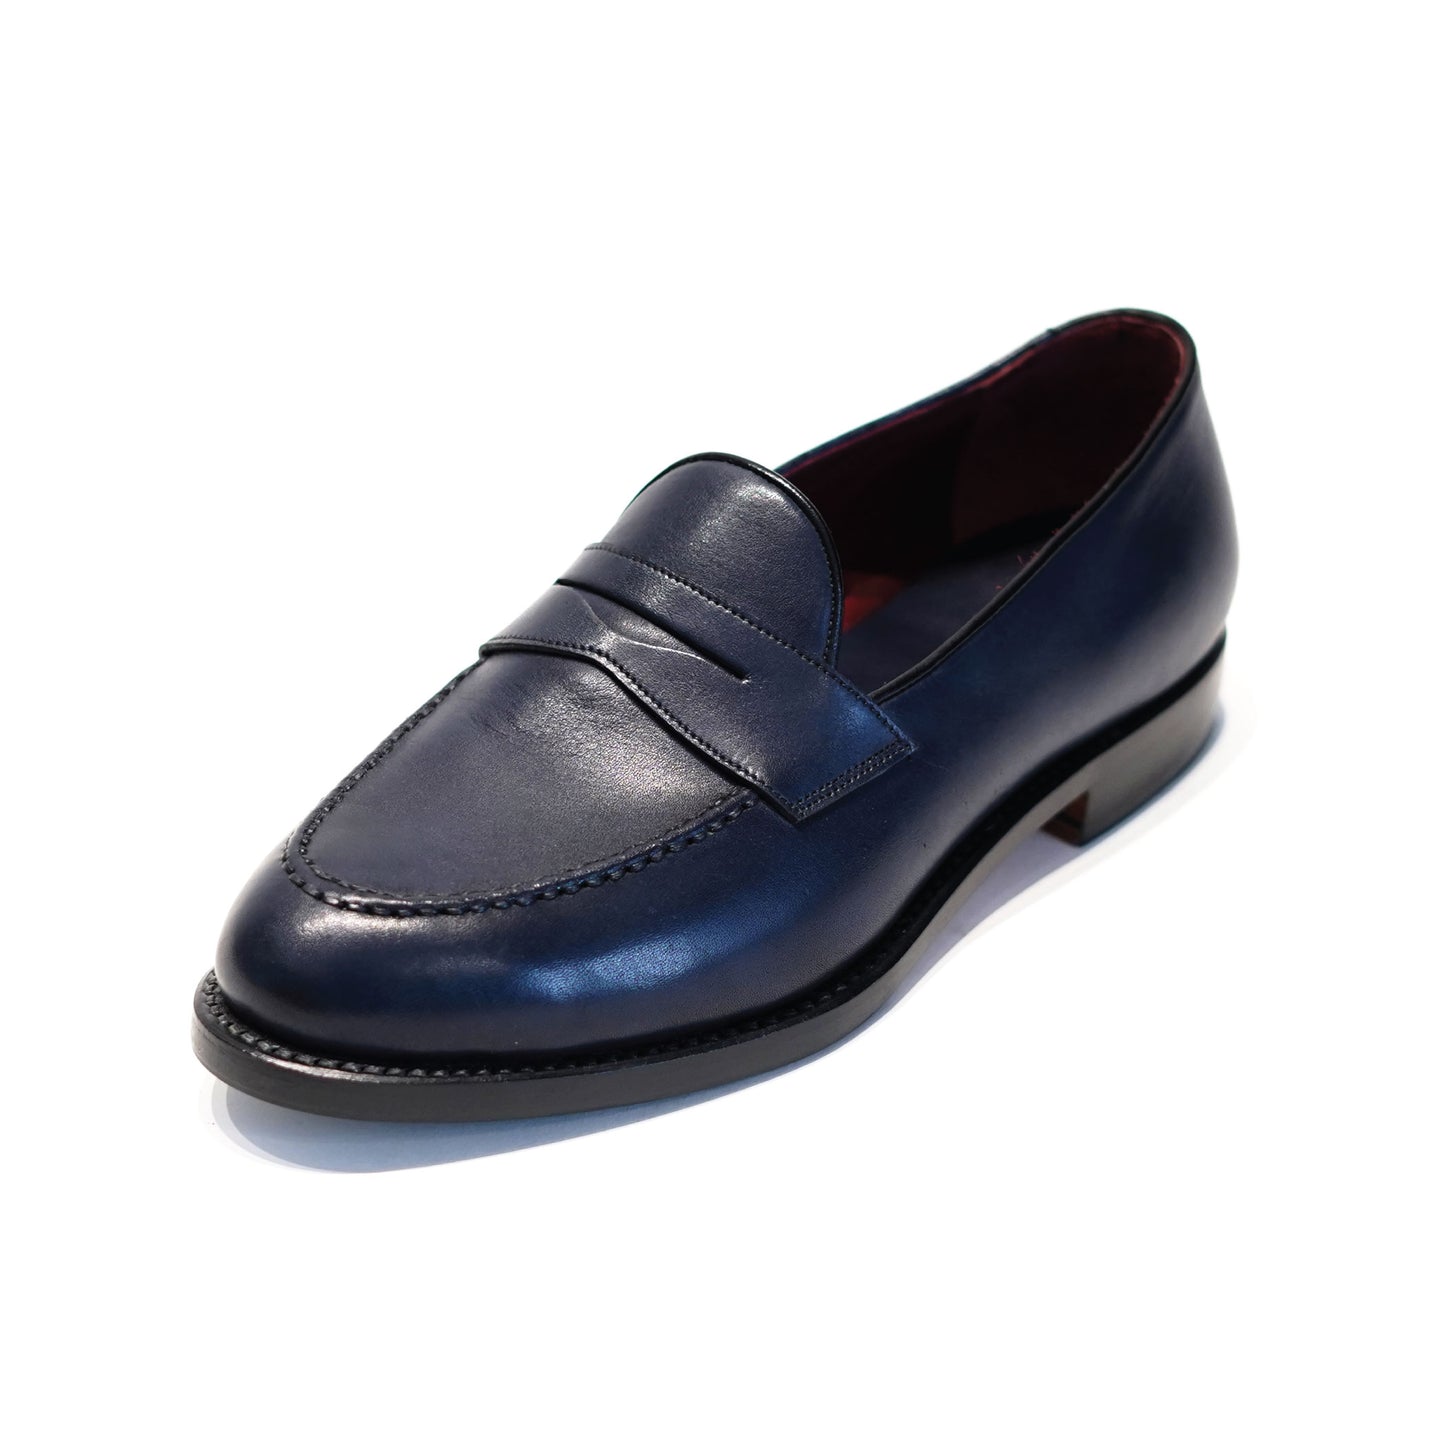 ML Penny Loafer - Navy